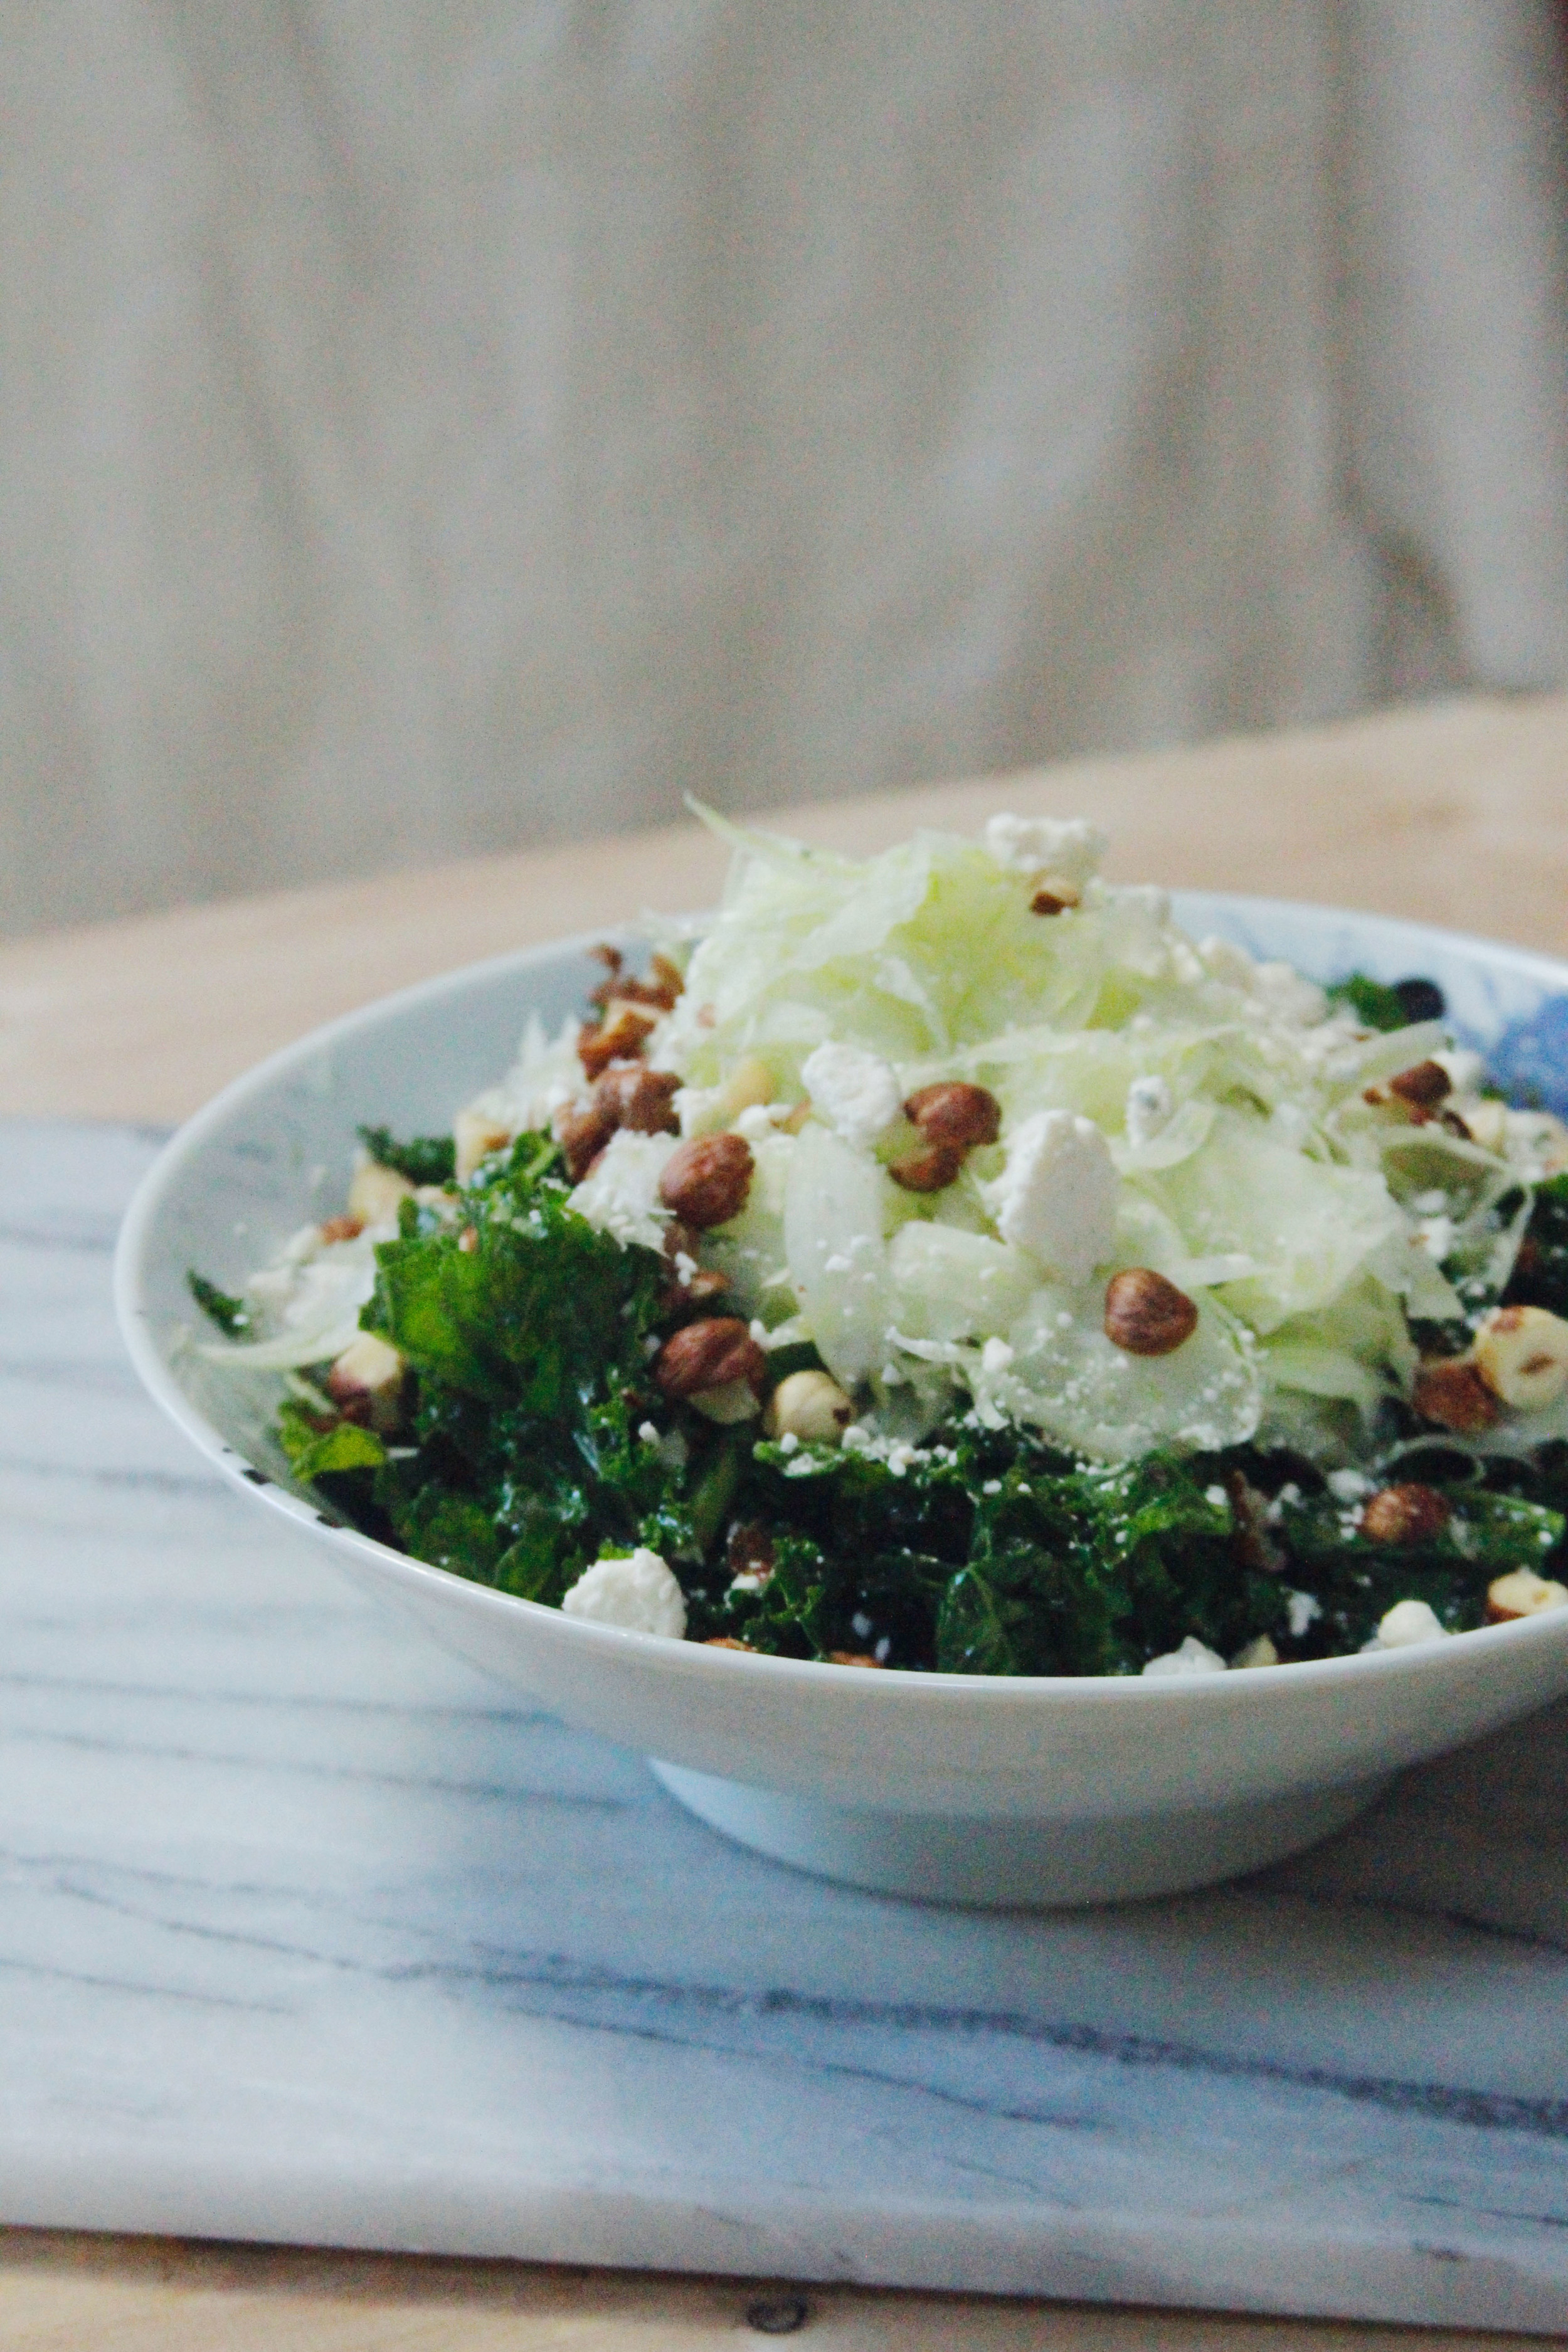 Kale salad with fennel and hazelnuts